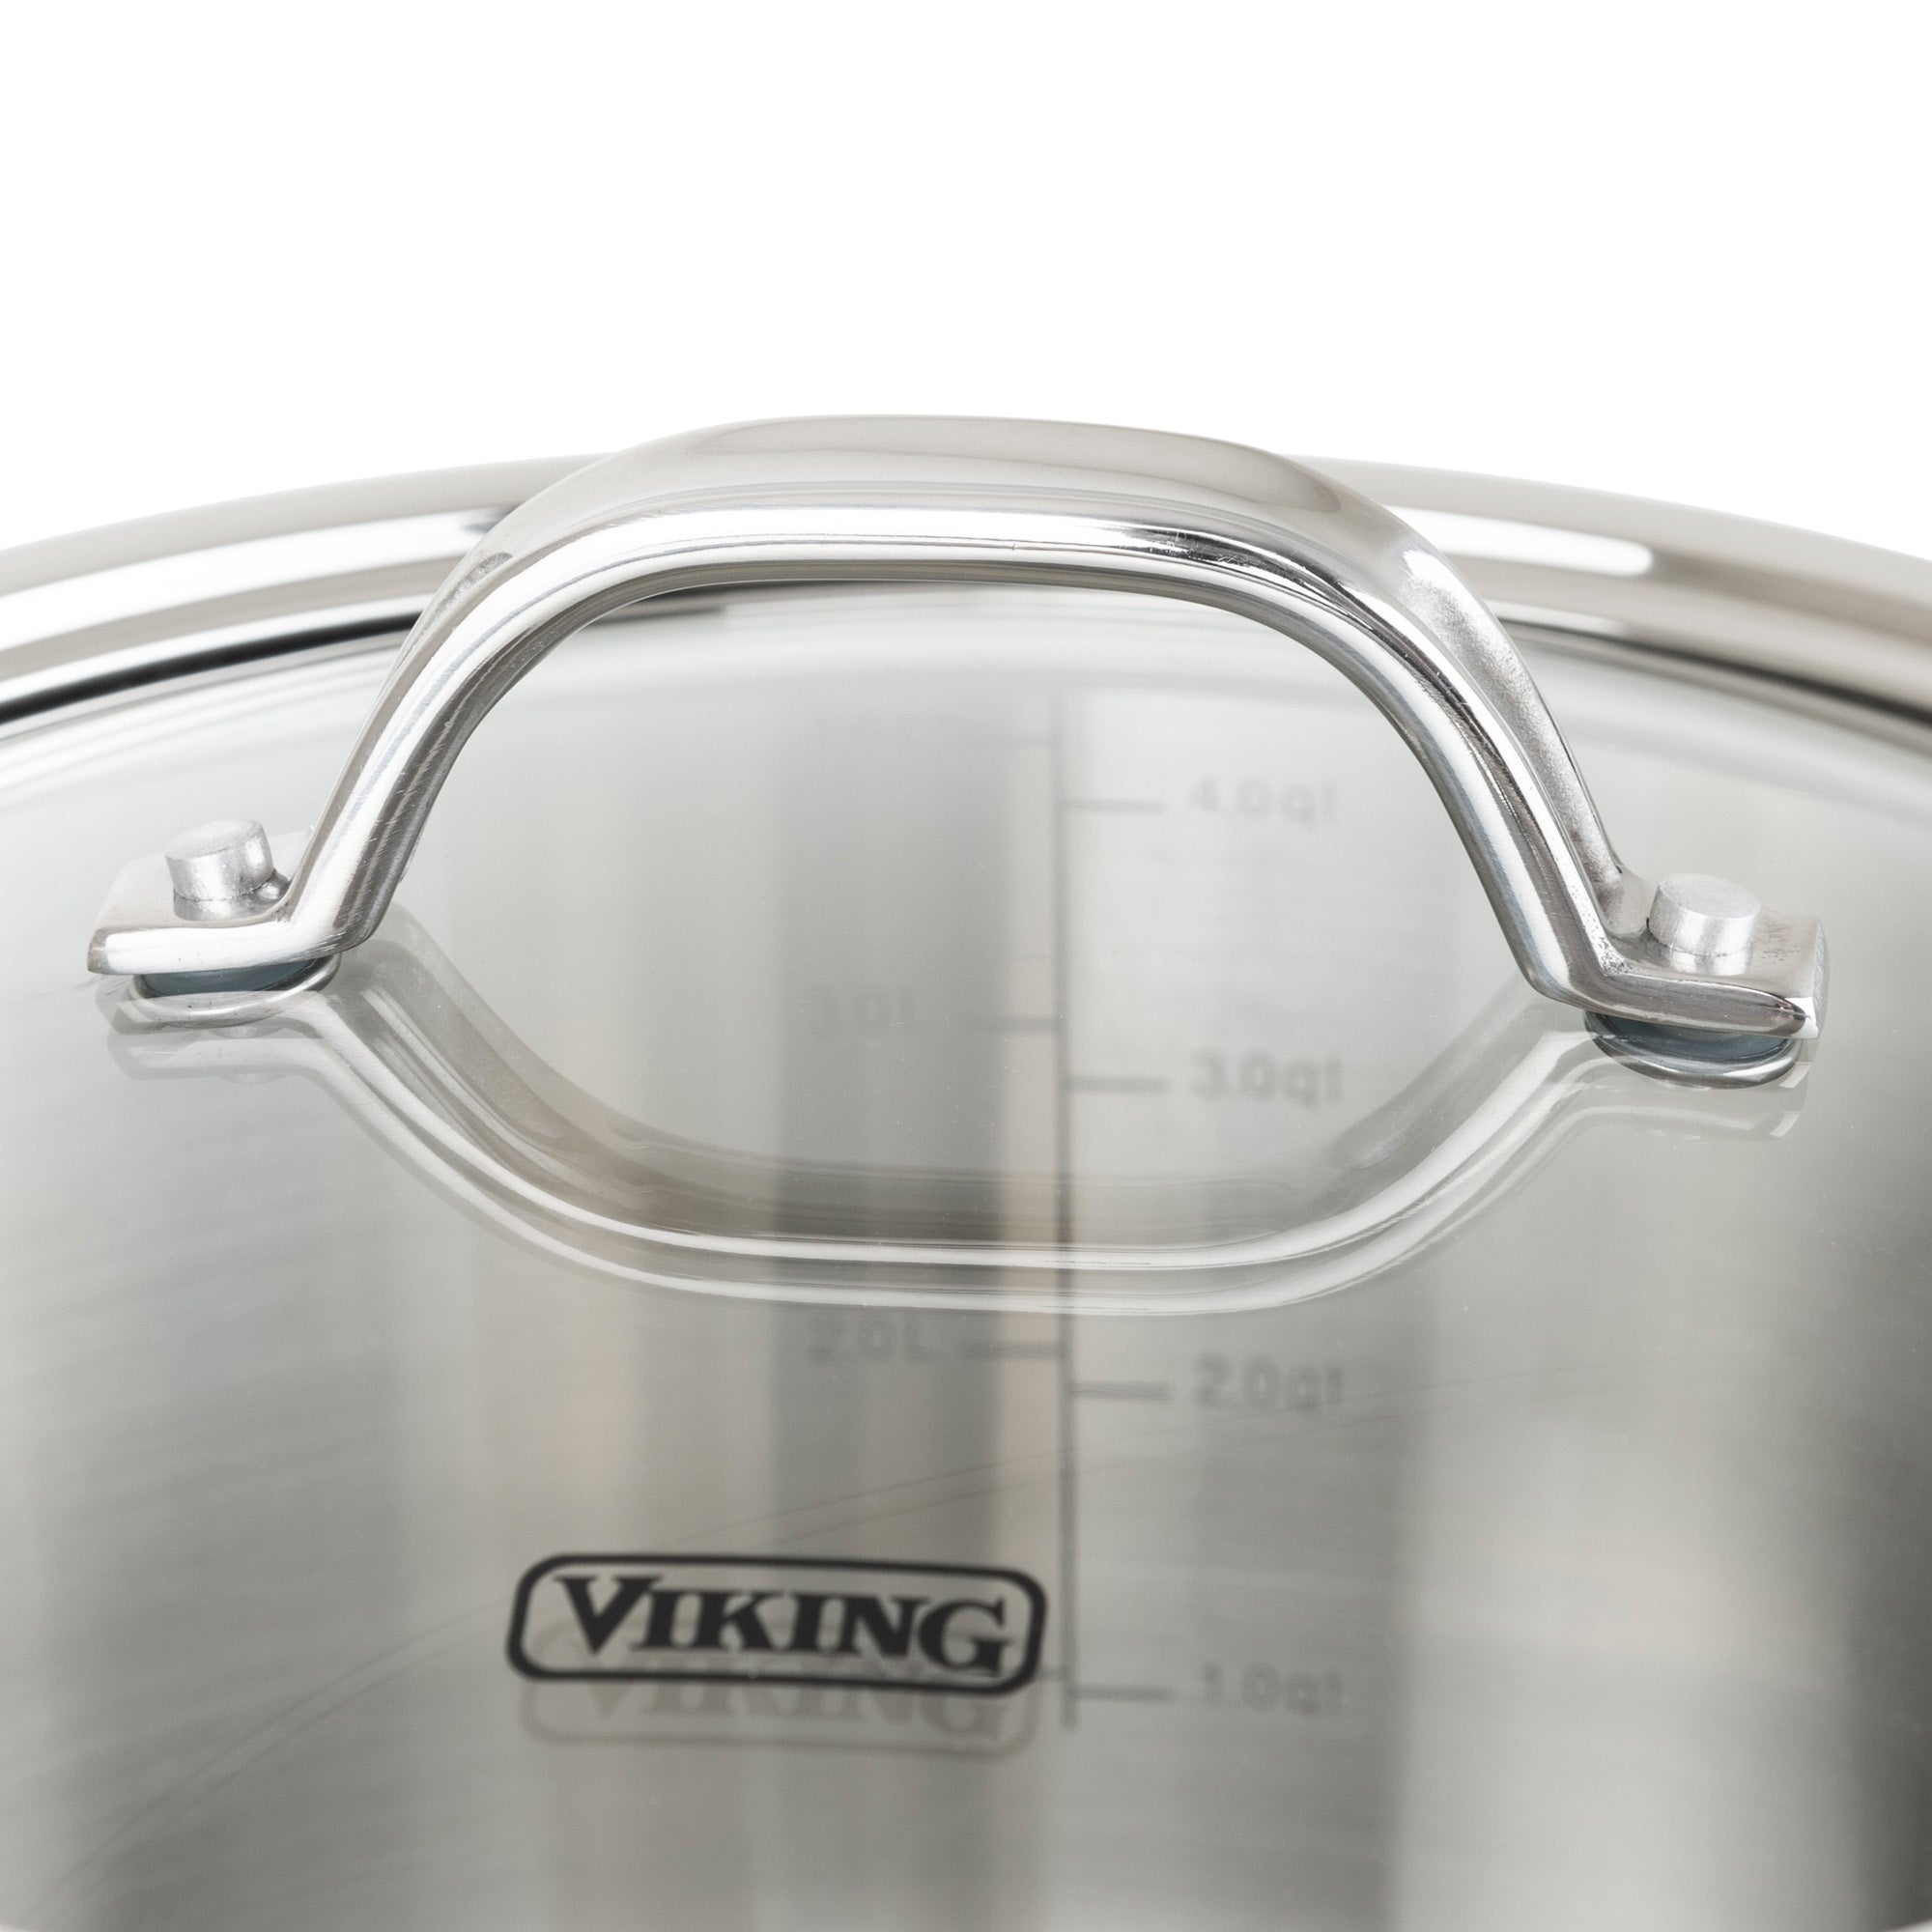 Viking 3-Ply Black and Copper 5-Quart Dutch Oven with Glass Lid